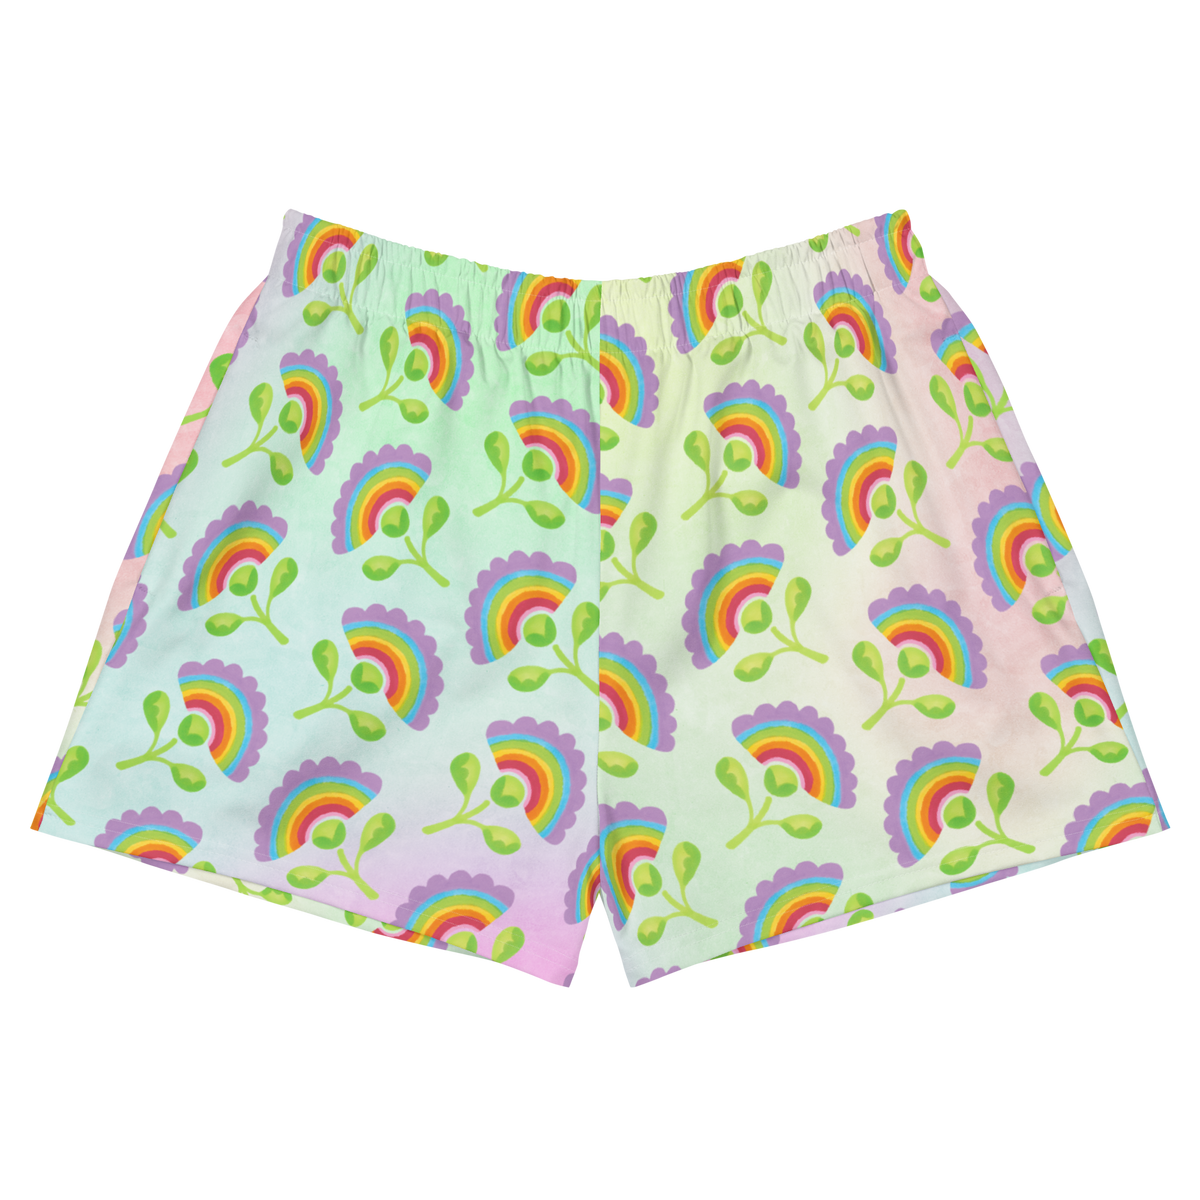 Rainbows in Bloom Women’s Athletic Shorts